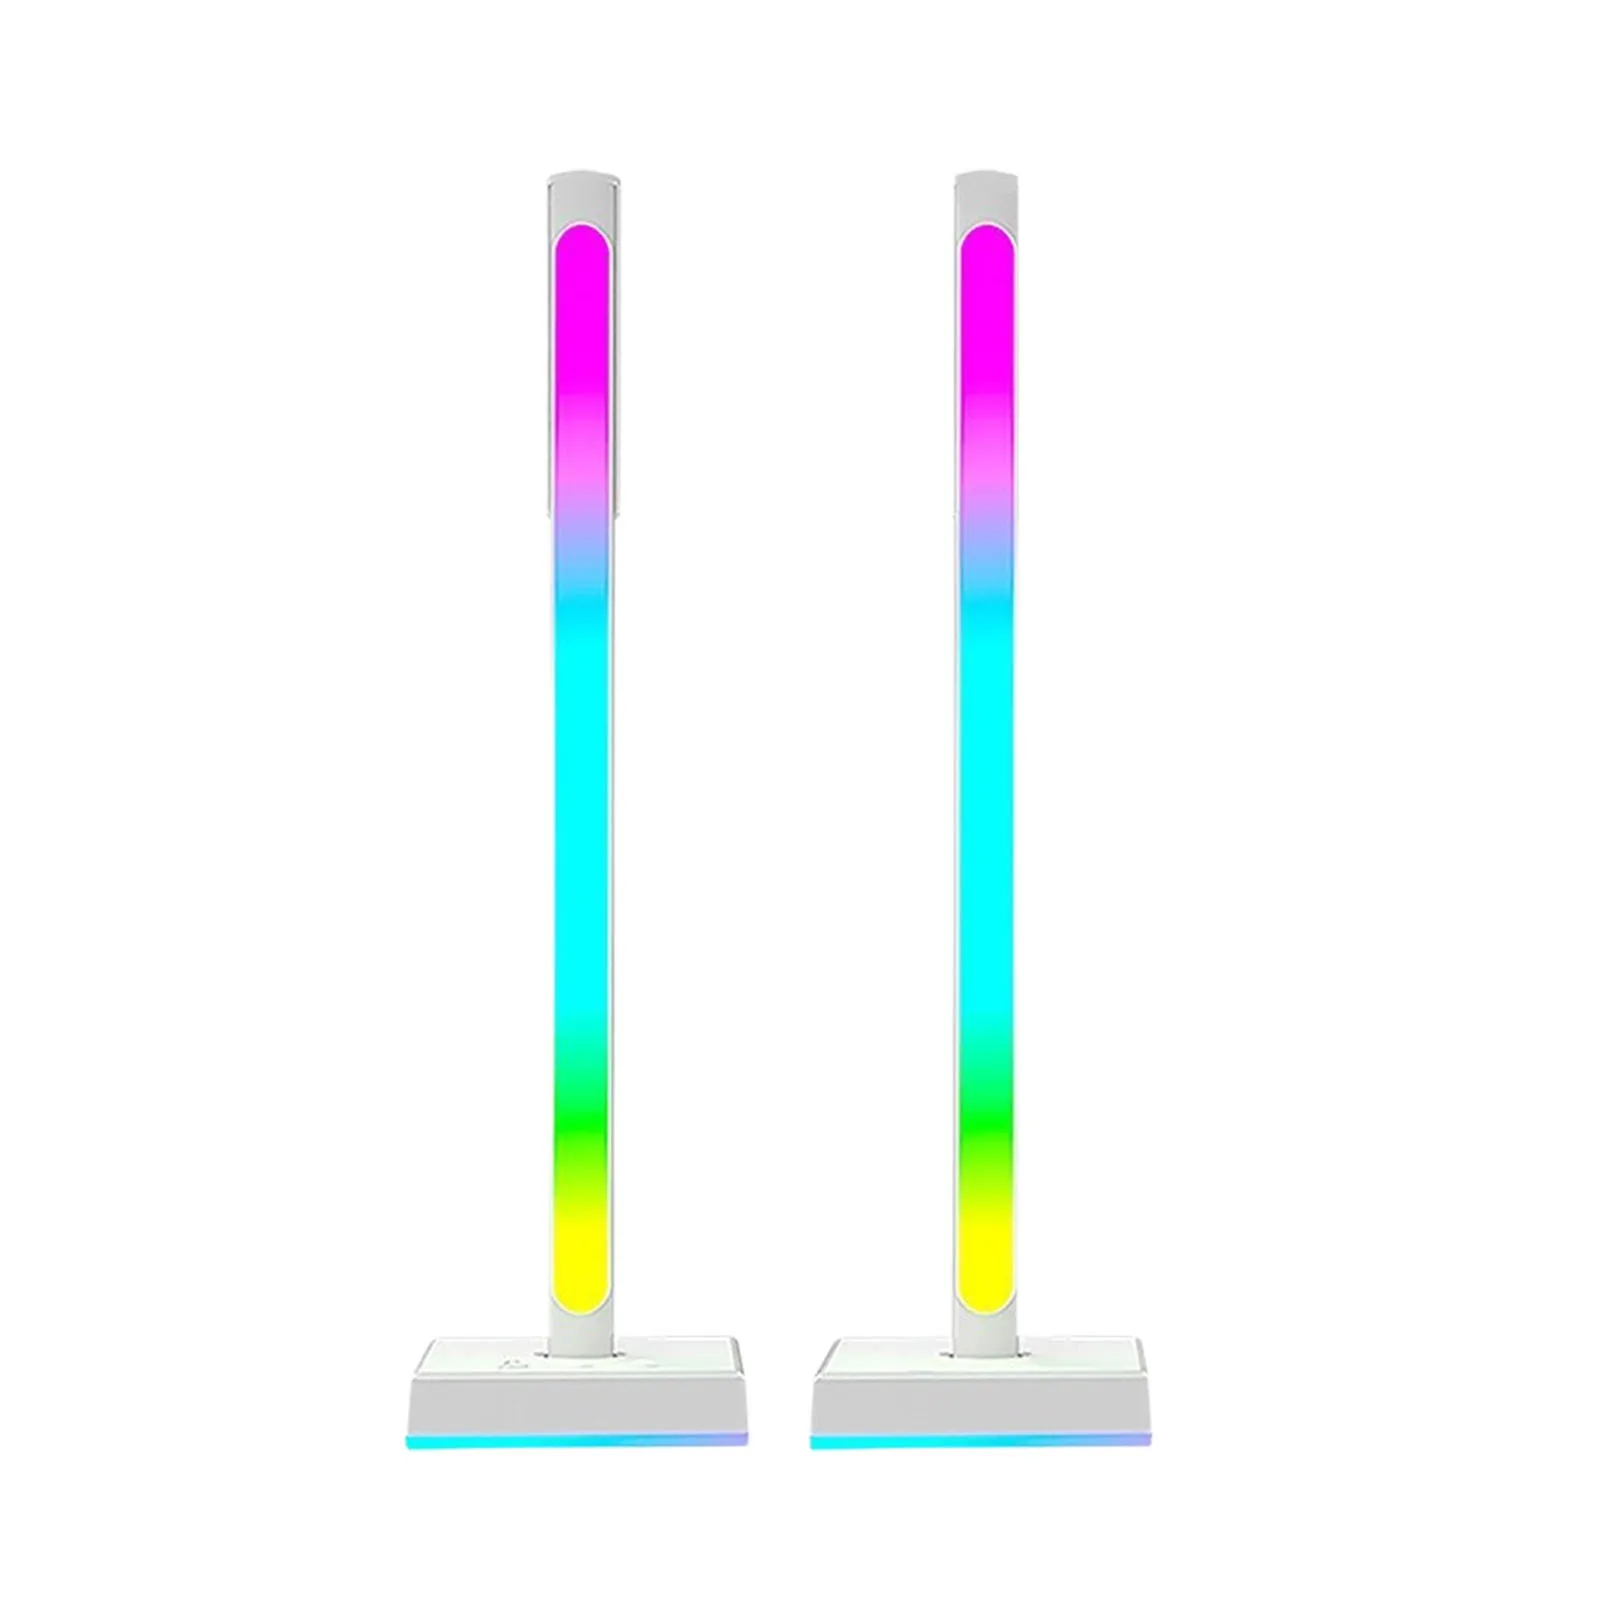 

Smart Light Bars With Headphone Brackets Changeable LED Lamp Bracket With Phone Control Colorful Lighting Storing Bar For PC TV